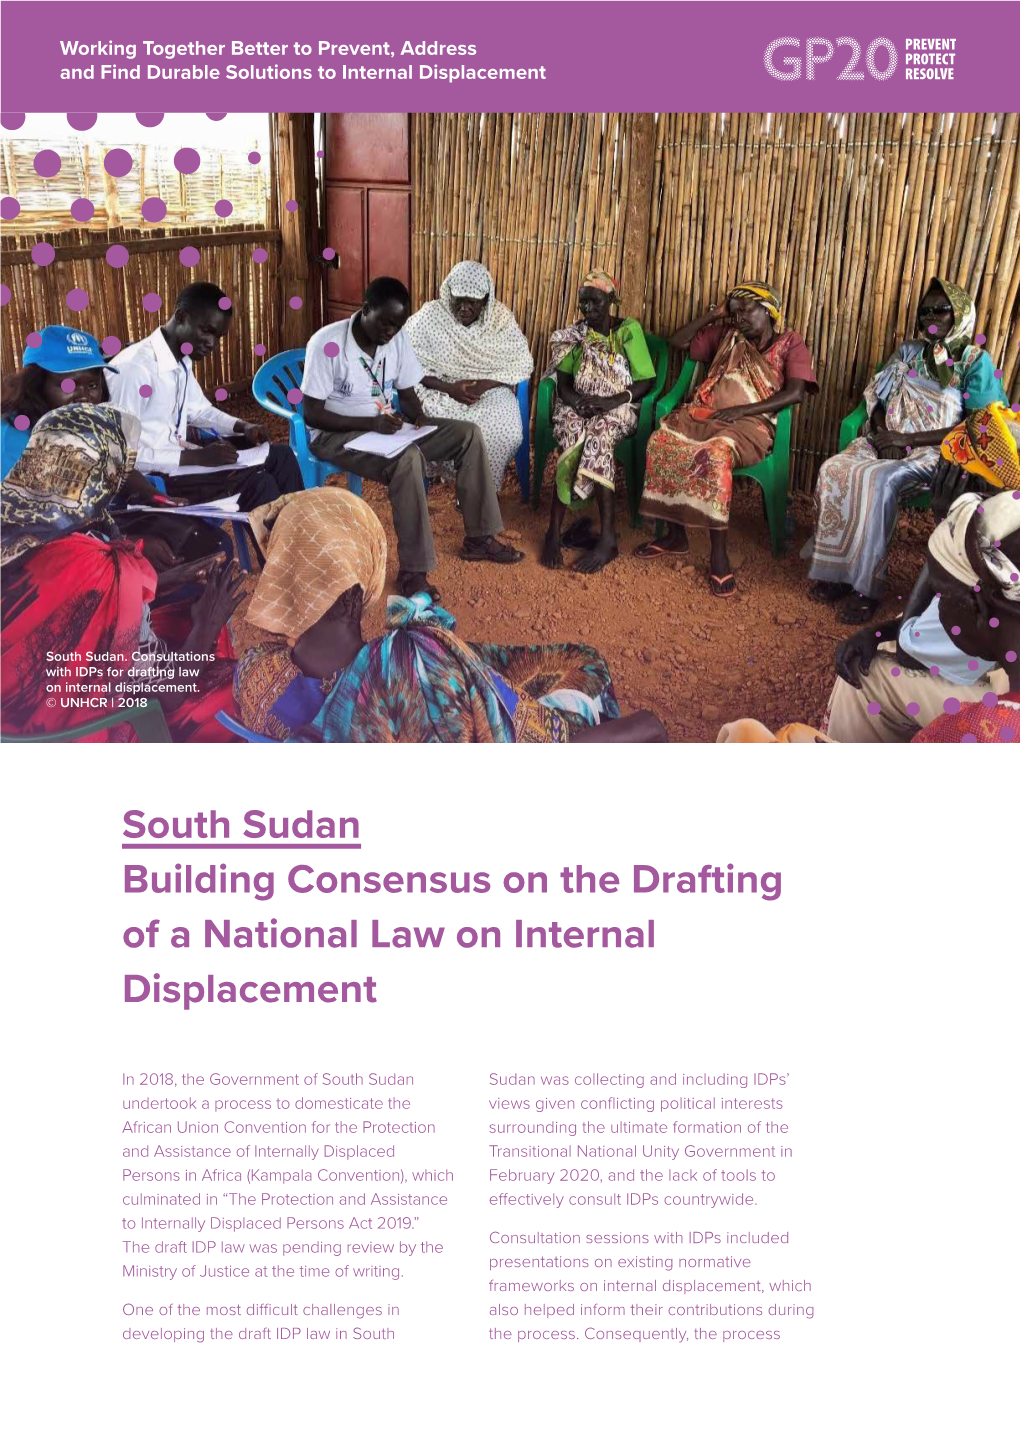 South Sudan Building Consensus on the Drafting of a National Law on Internal Displacement